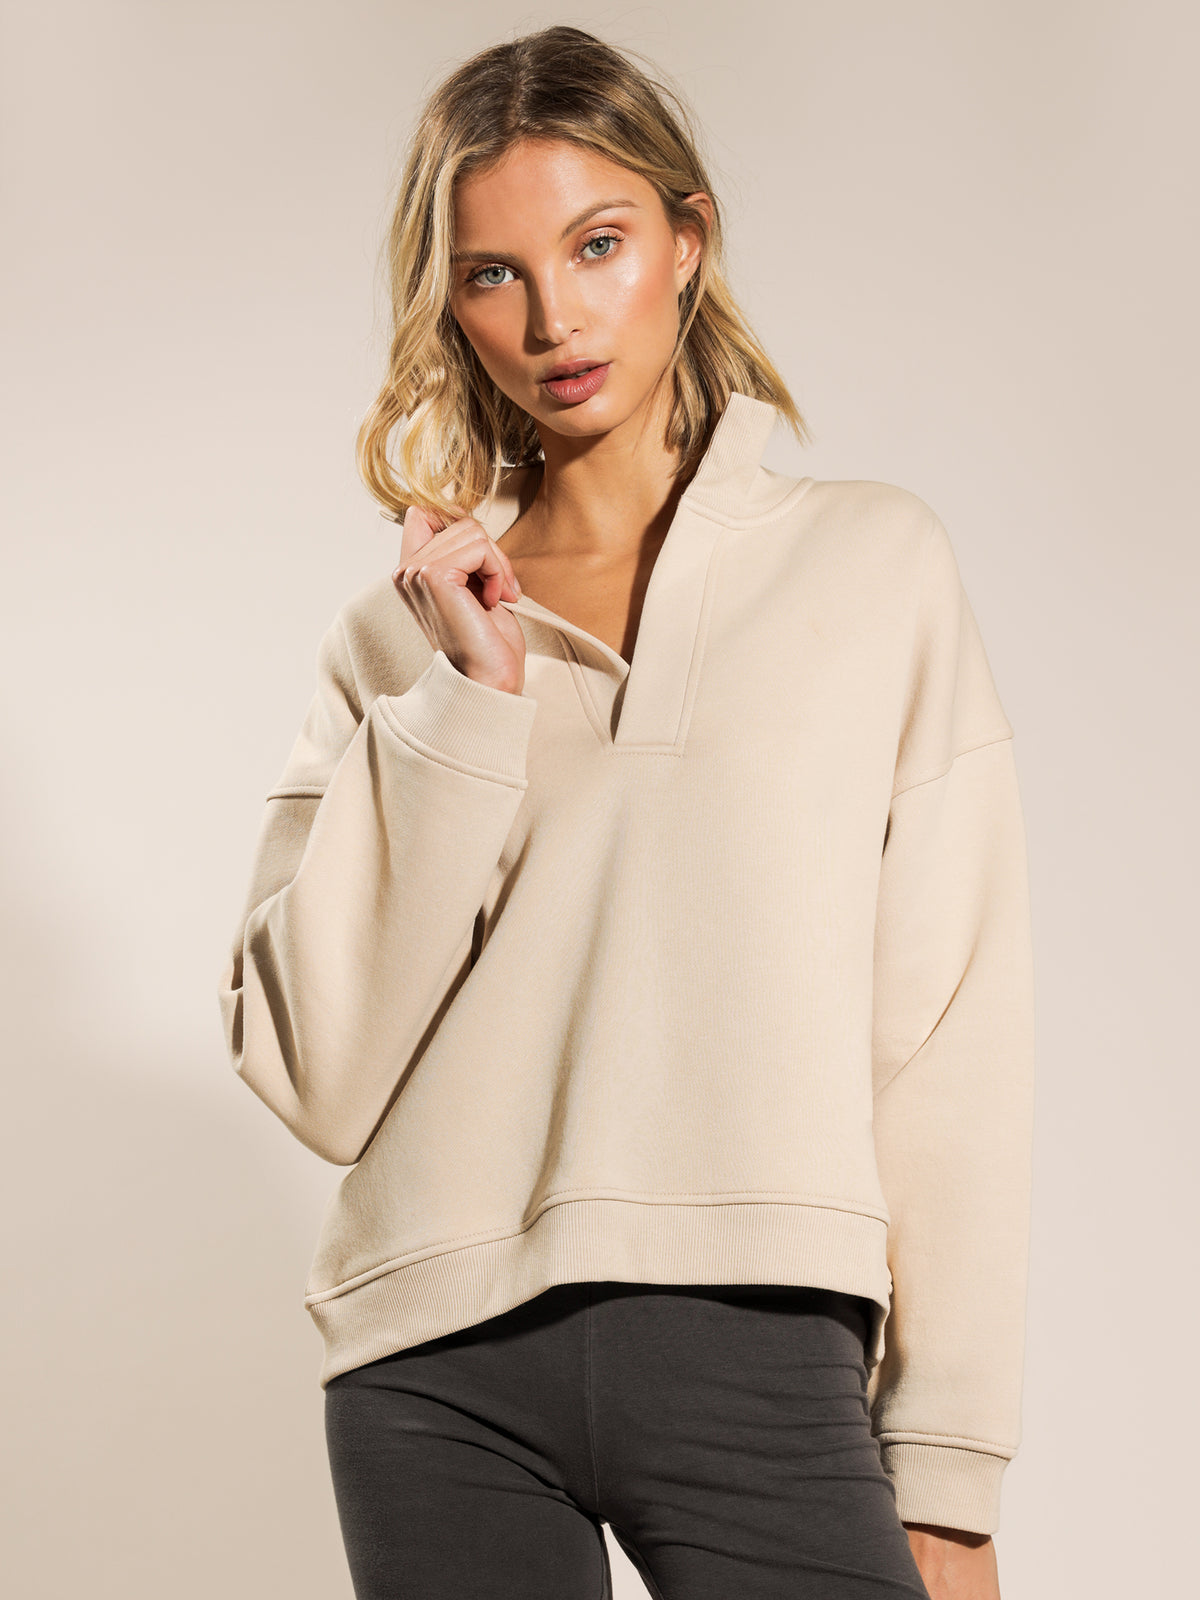 Carter Classic Rugby Sweater in Sand